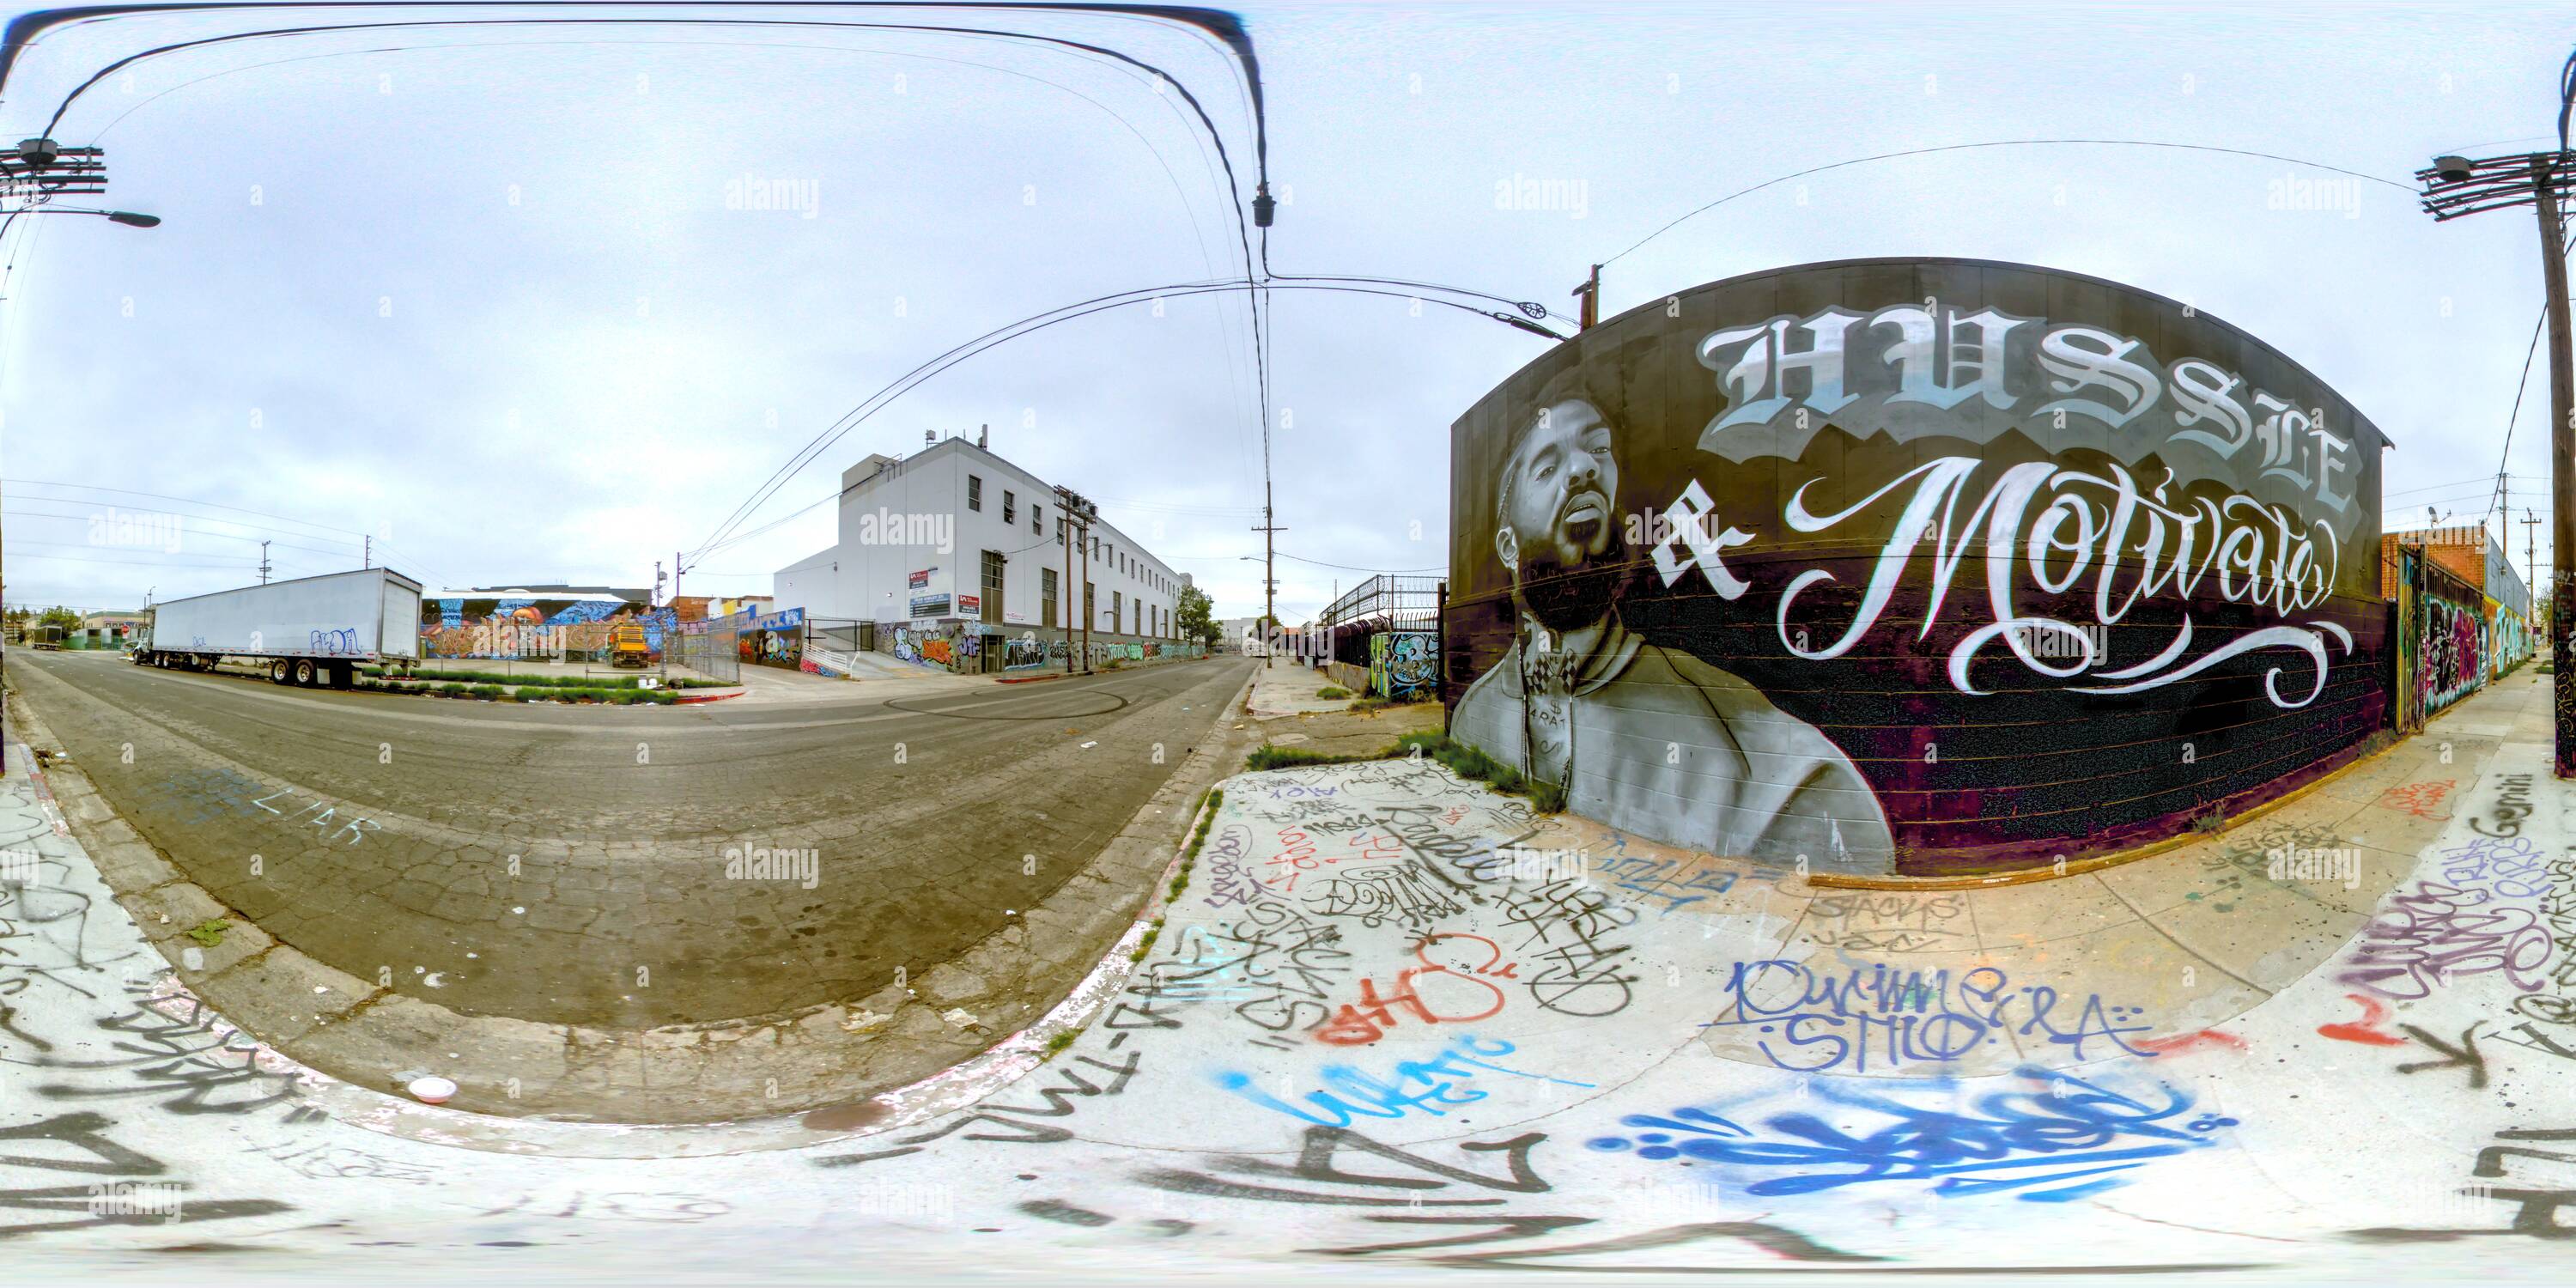 360 degree panoramic view of Los Angeles, Downtown Graffiti Alleyway complex 09 - Nipsey Hussle RIP